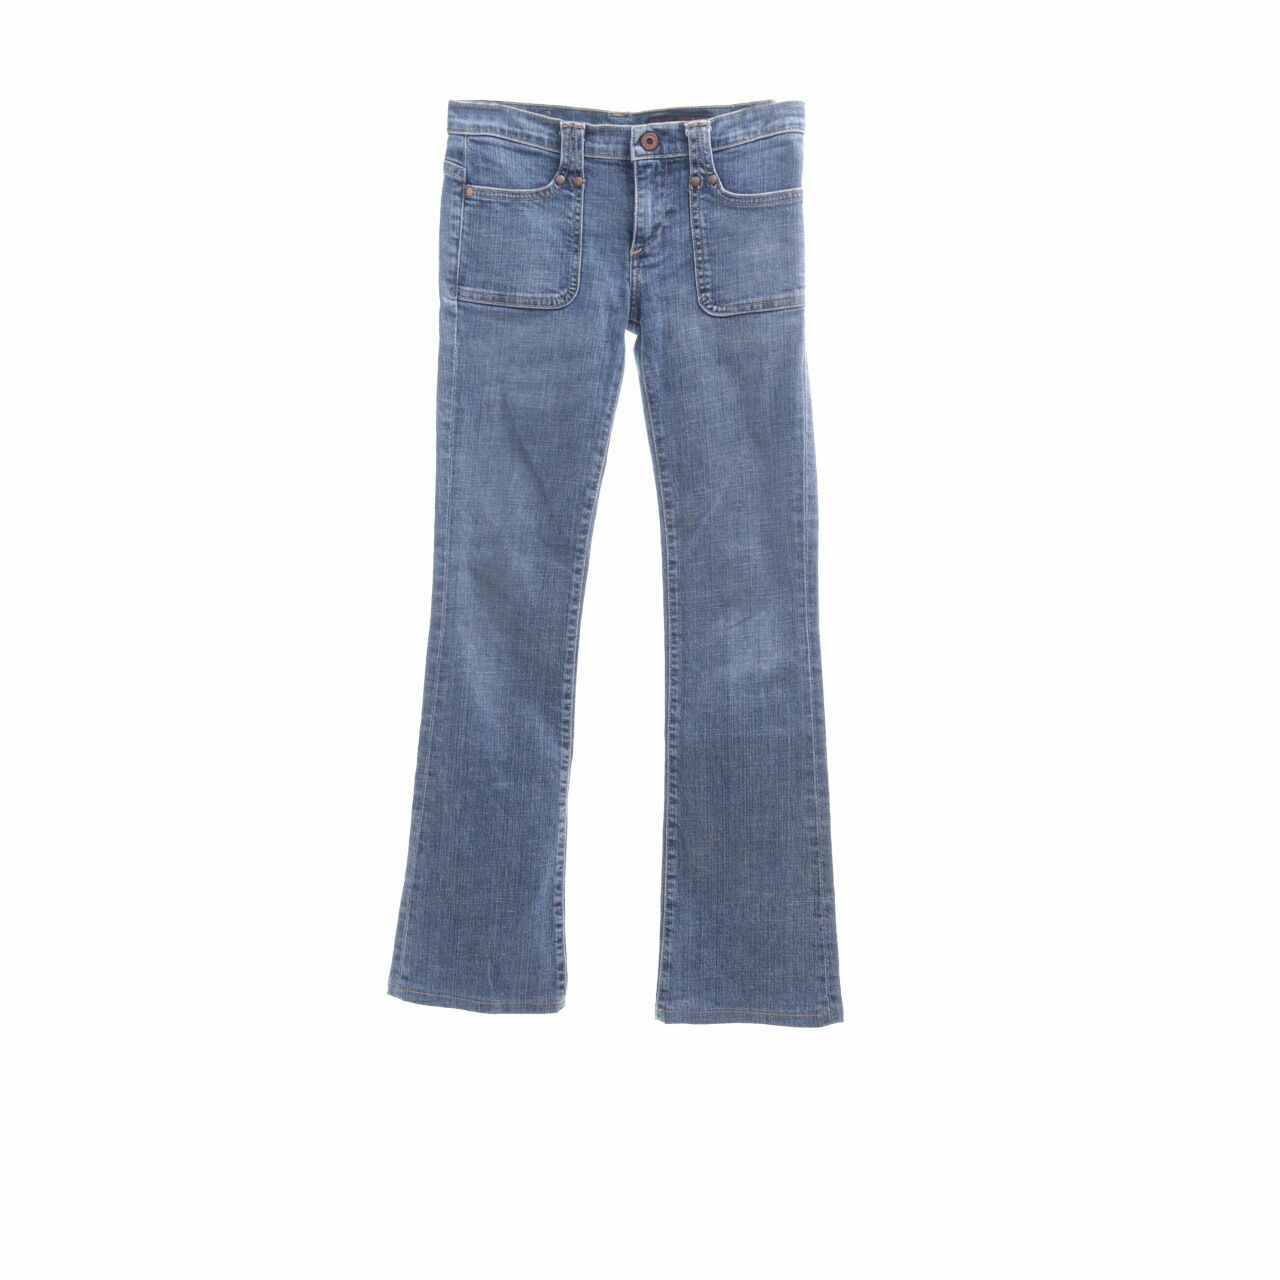 Adriano Goldschmied Dark Blue Washed Pants